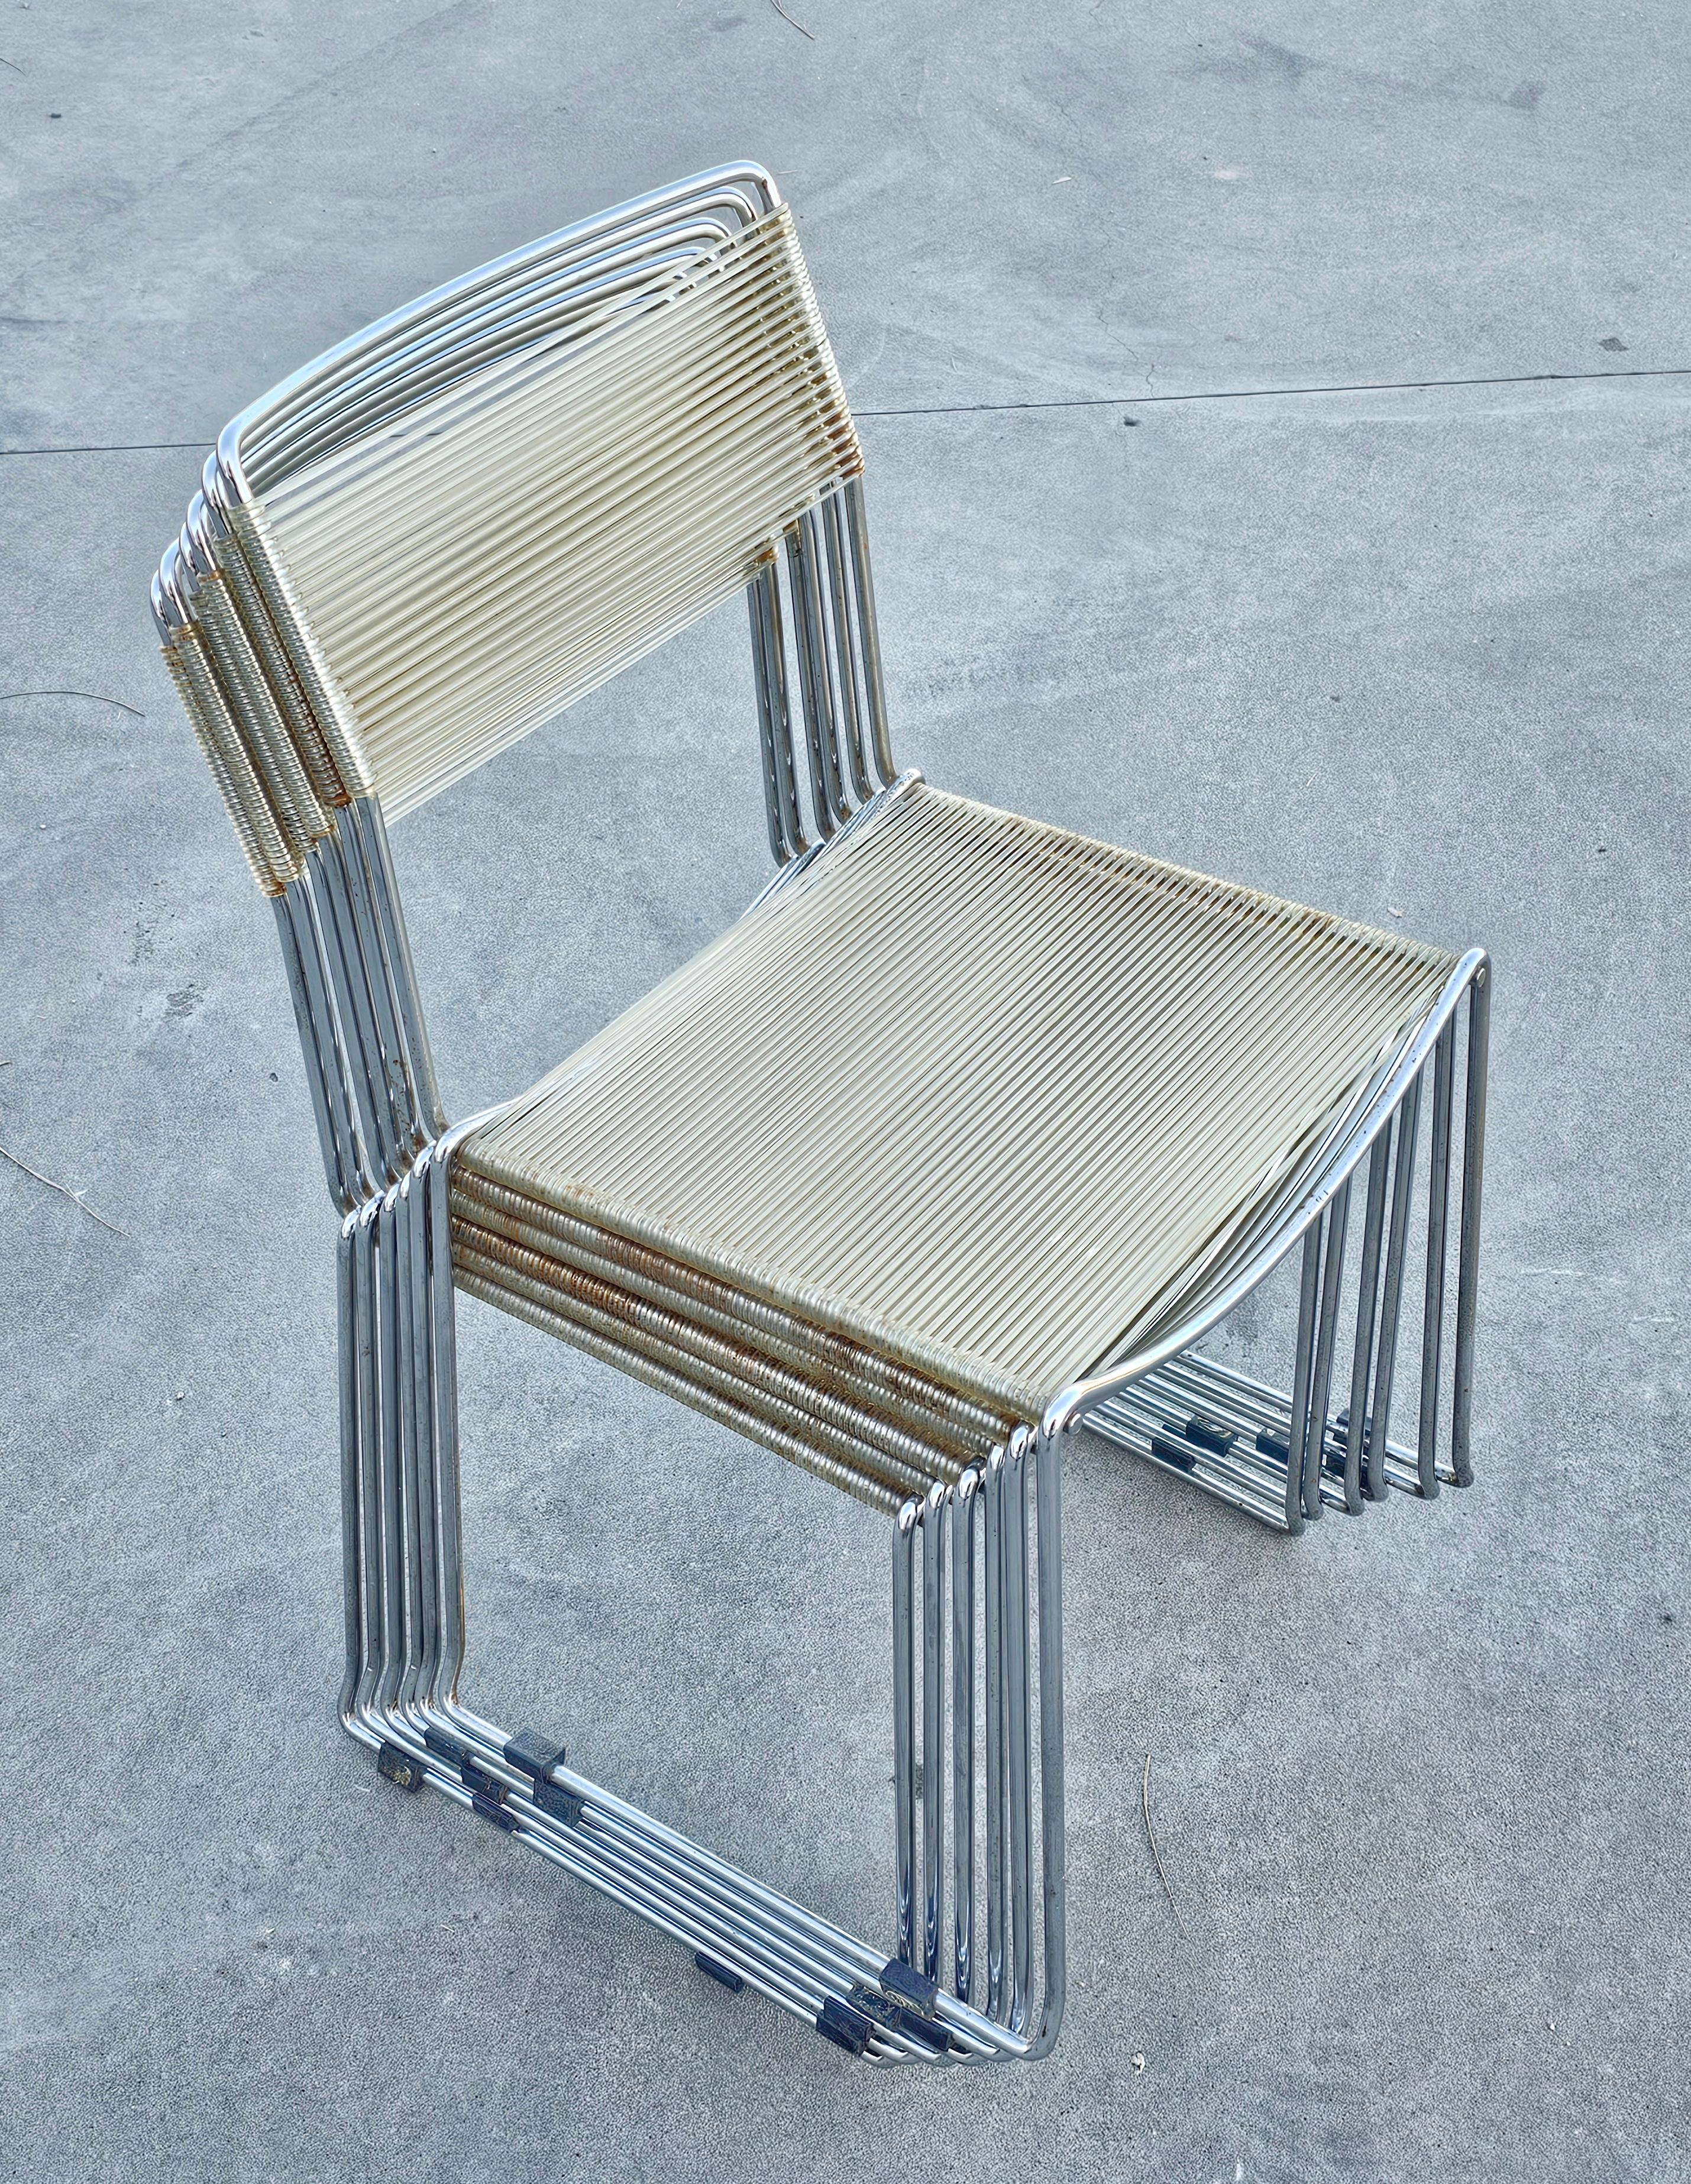 In this listing you will find a set of 6 postmoderen dining chairs called Spaghetti chairs, due to their PVC threaded seats and backrests. The chairs were designed by Giandomenico Belotti for Alias in 1970s.

Chairs are in good vintage condition